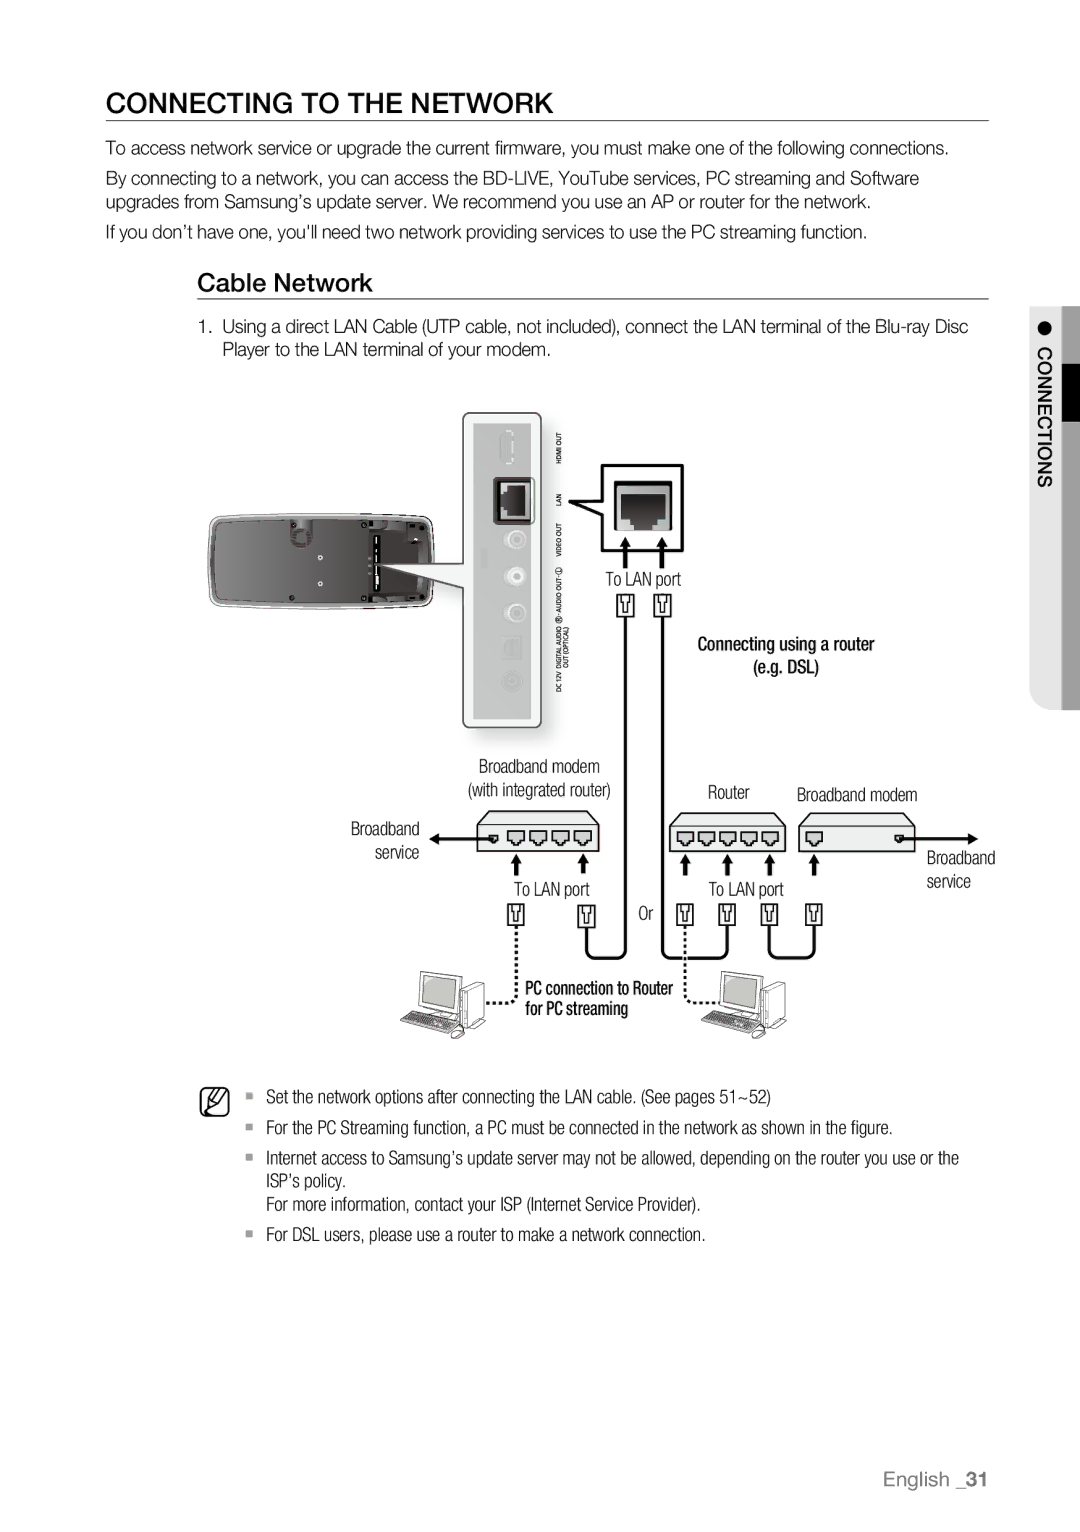 Samsung BD-P4600/XEF manual Connecting to the Network, Cable Network, Broadband modem With integrated router, Service 